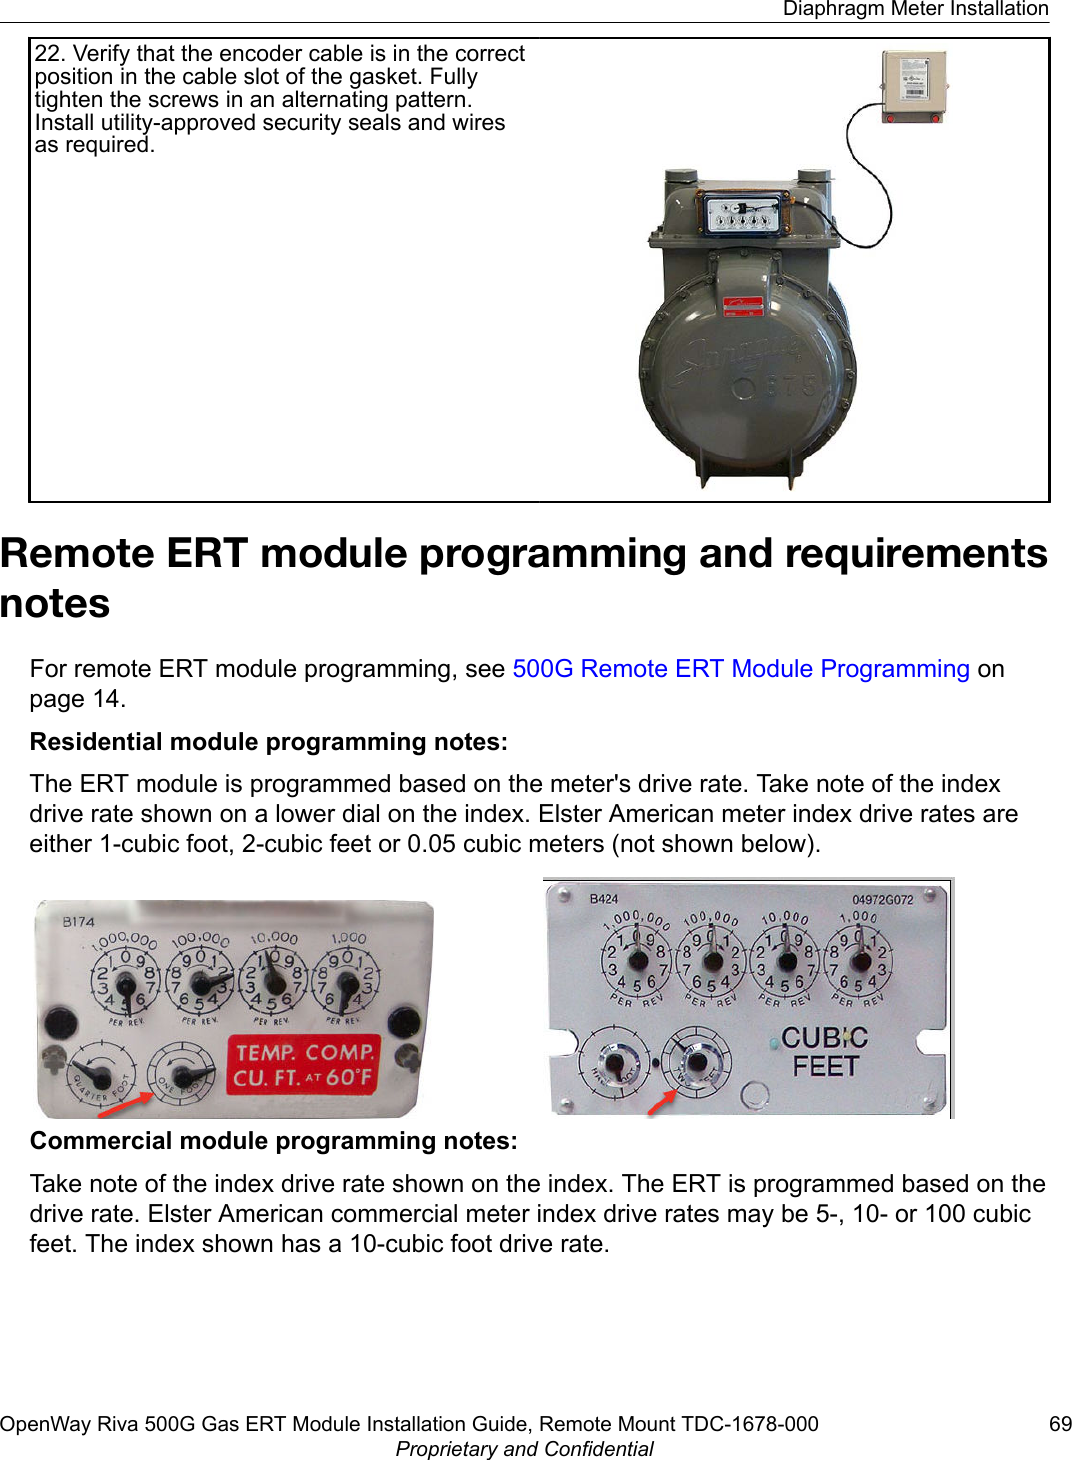 22. Verify that the encoder cable is in the correctposition in the cable slot of the gasket. Fullytighten the screws in an alternating pattern.Install utility-approved security seals and wiresas required.Remote ERT module programming and requirementsnotesFor remote ERT module programming, see 500G Remote ERT Module Programming onpage 14.Residential module programming notes:The ERT module is programmed based on the meter&apos;s drive rate. Take note of the indexdrive rate shown on a lower dial on the index. Elster American meter index drive rates areeither 1-cubic foot, 2-cubic feet or 0.05 cubic meters (not shown below).Commercial module programming notes:Take note of the index drive rate shown on the index. The ERT is programmed based on thedrive rate. Elster American commercial meter index drive rates may be 5-, 10- or 100 cubicfeet. The index shown has a 10-cubic foot drive rate.Diaphragm Meter InstallationOpenWay Riva 500G Gas ERT Module Installation Guide, Remote Mount TDC-1678-000 69Proprietary and Confidential